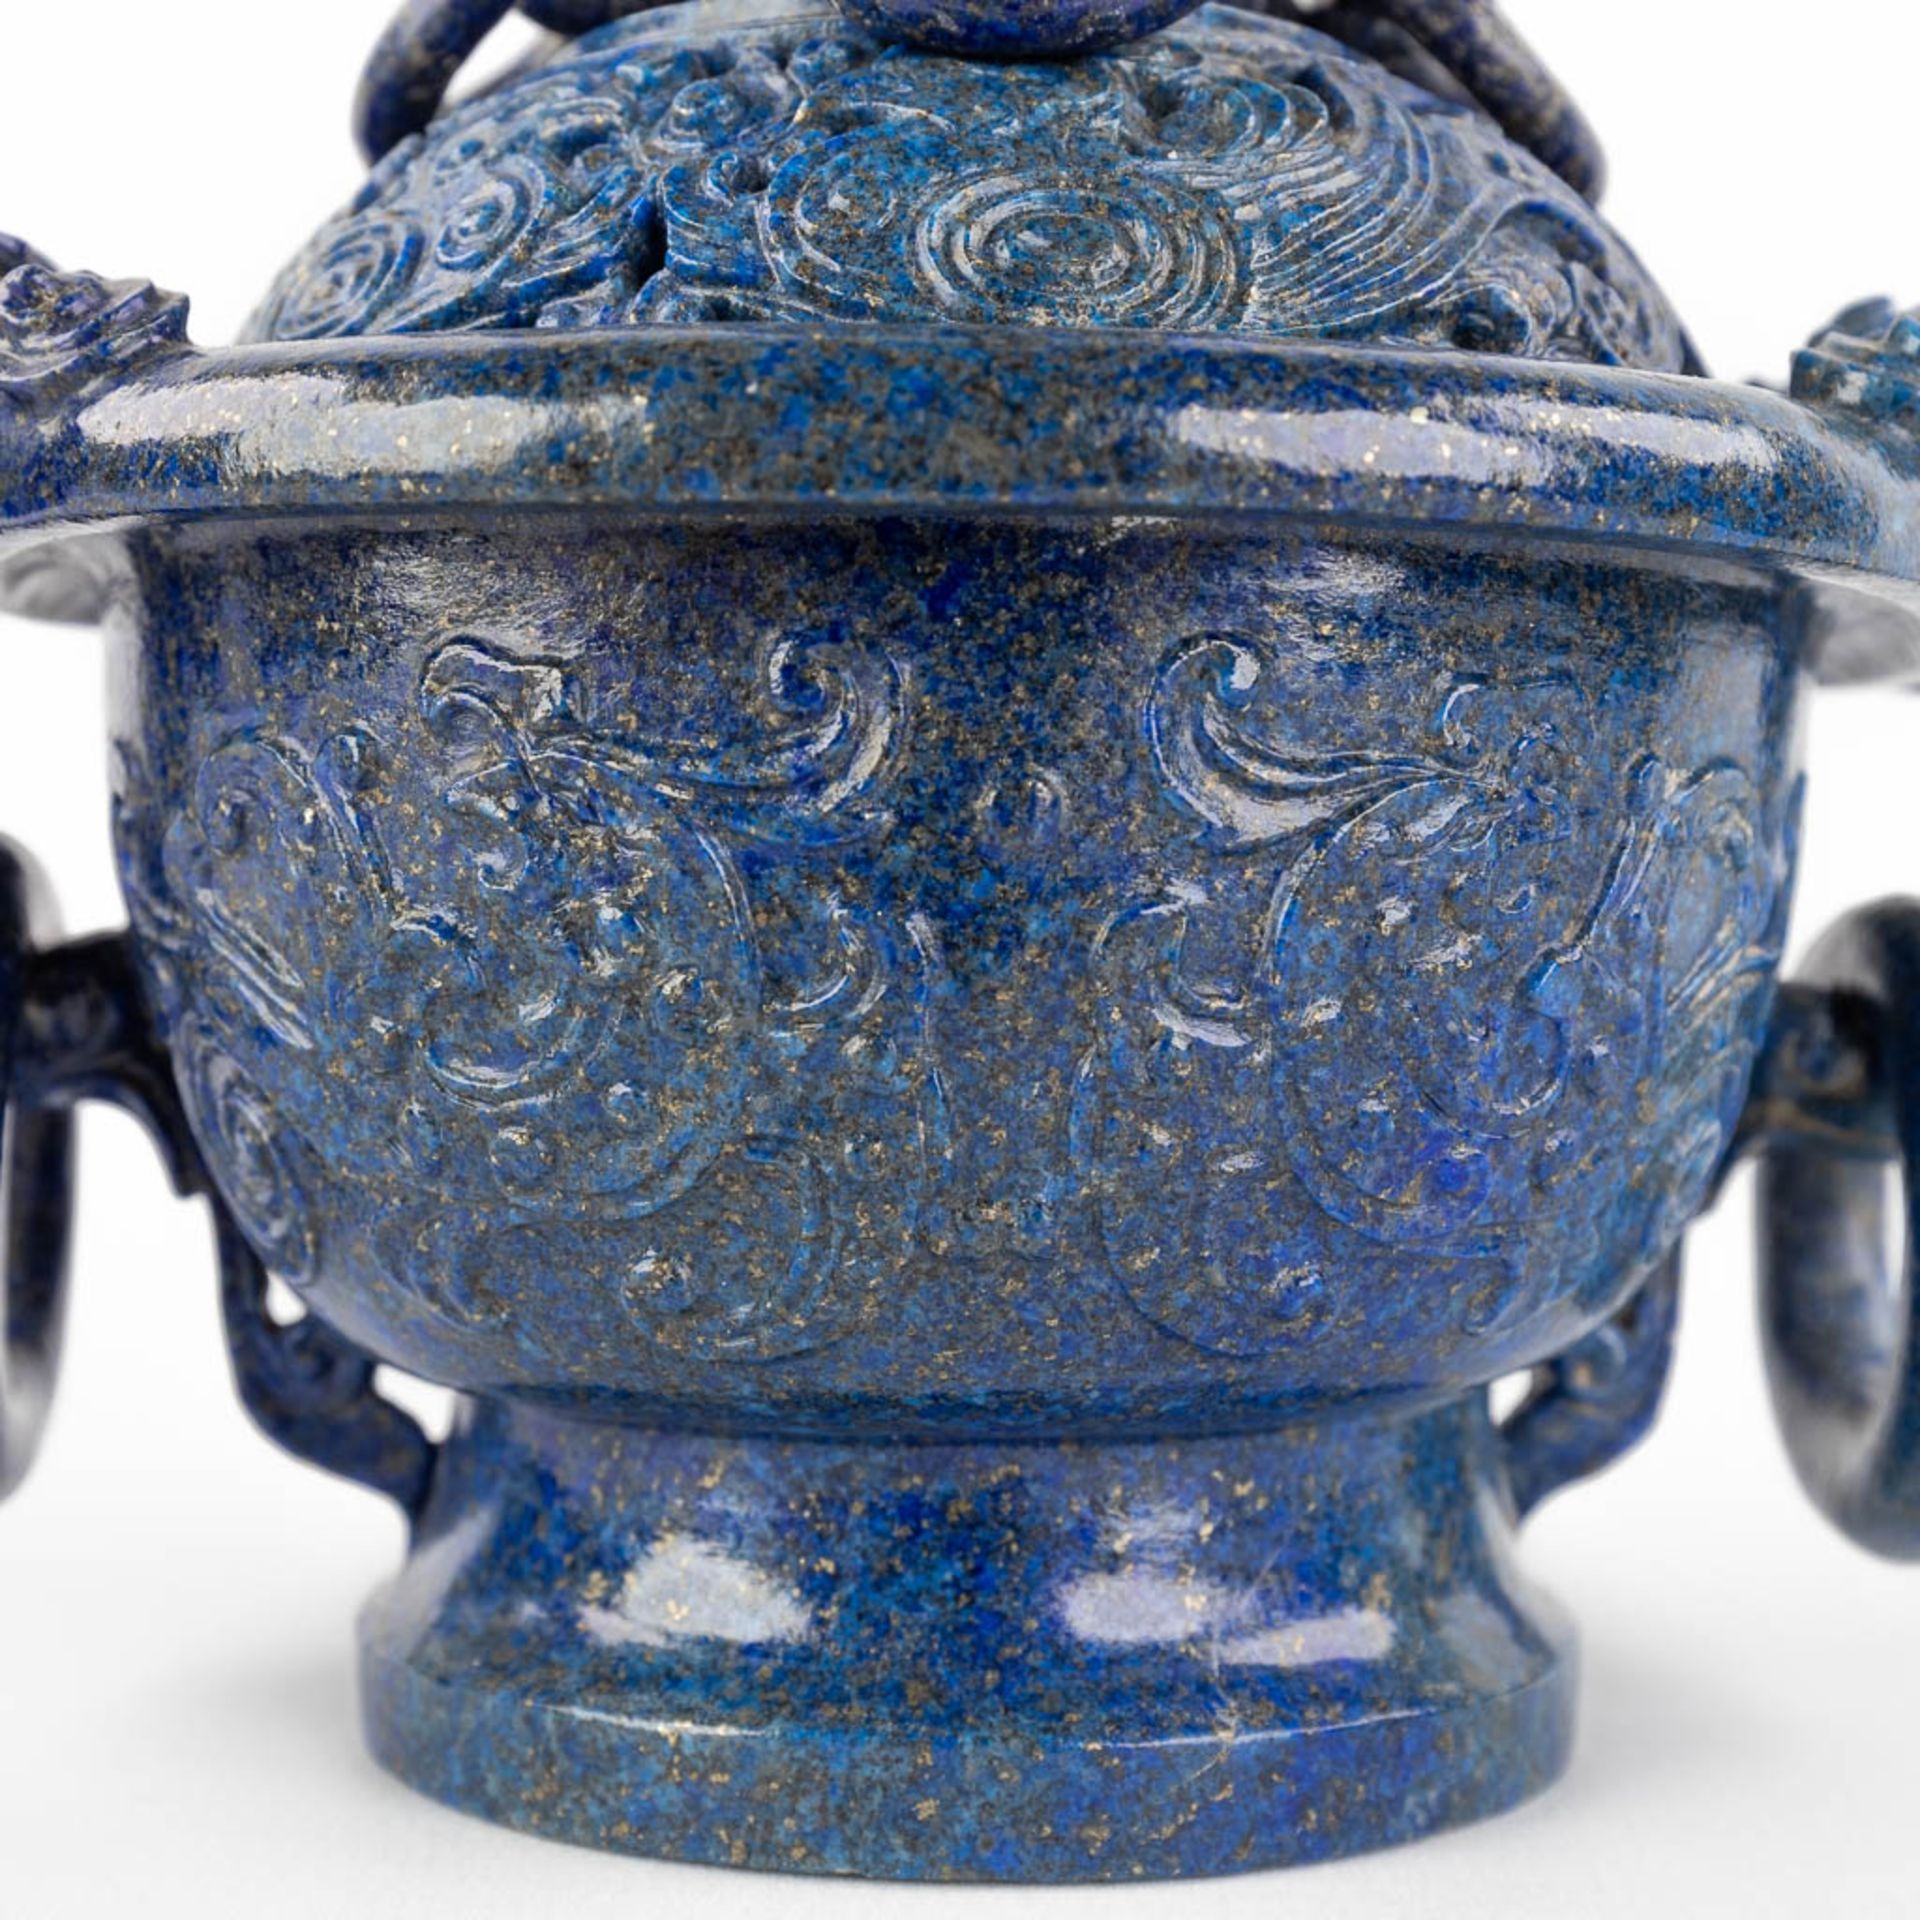 A Chinese censer, sculptured Lapis Lazuli, decorated with birds and flowers. (D:11 x W:17 x H:14 cm) - Image 11 of 11